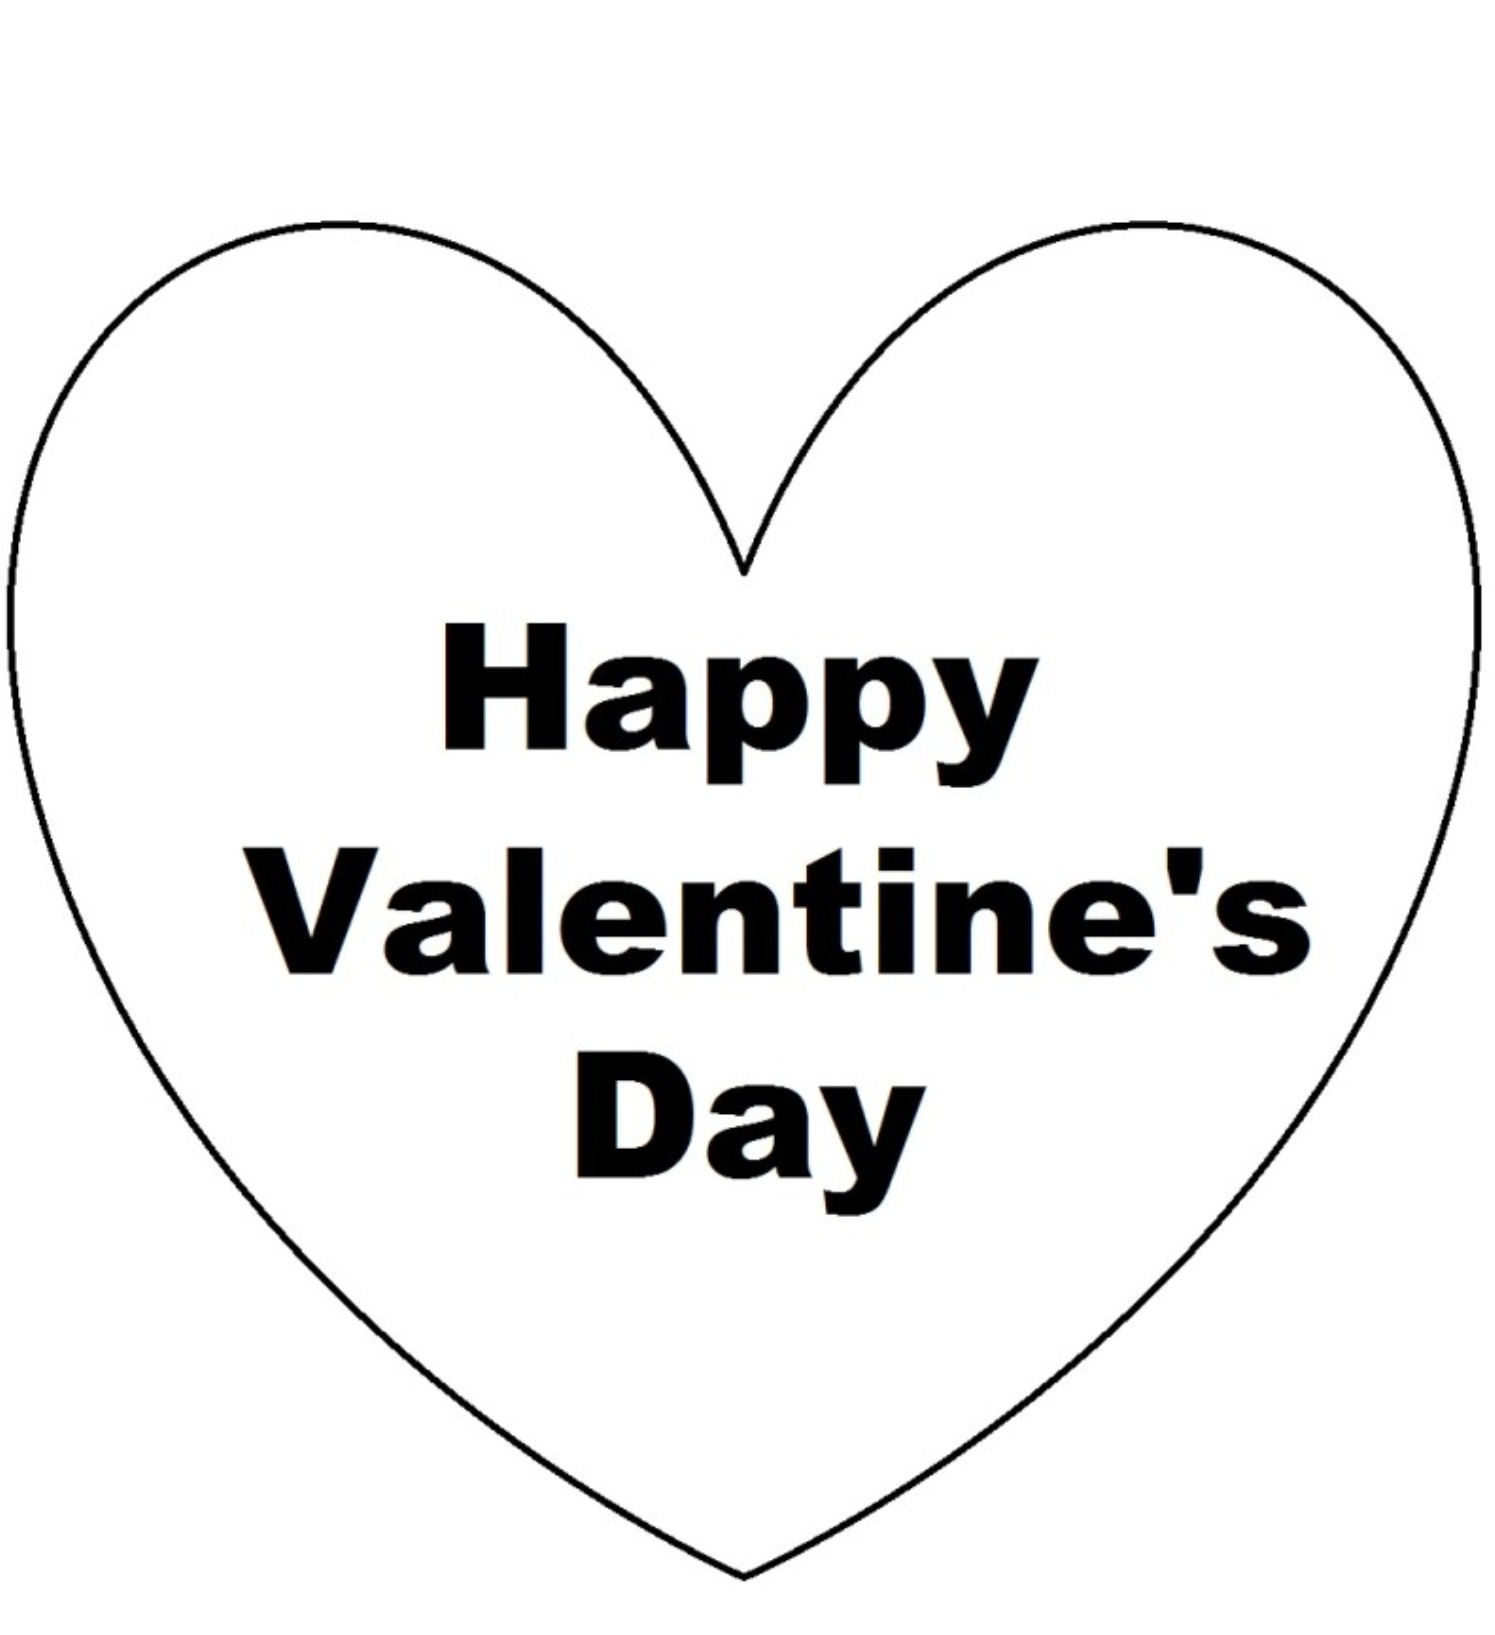 Heart Of Happy Valentines Day Coloring Page